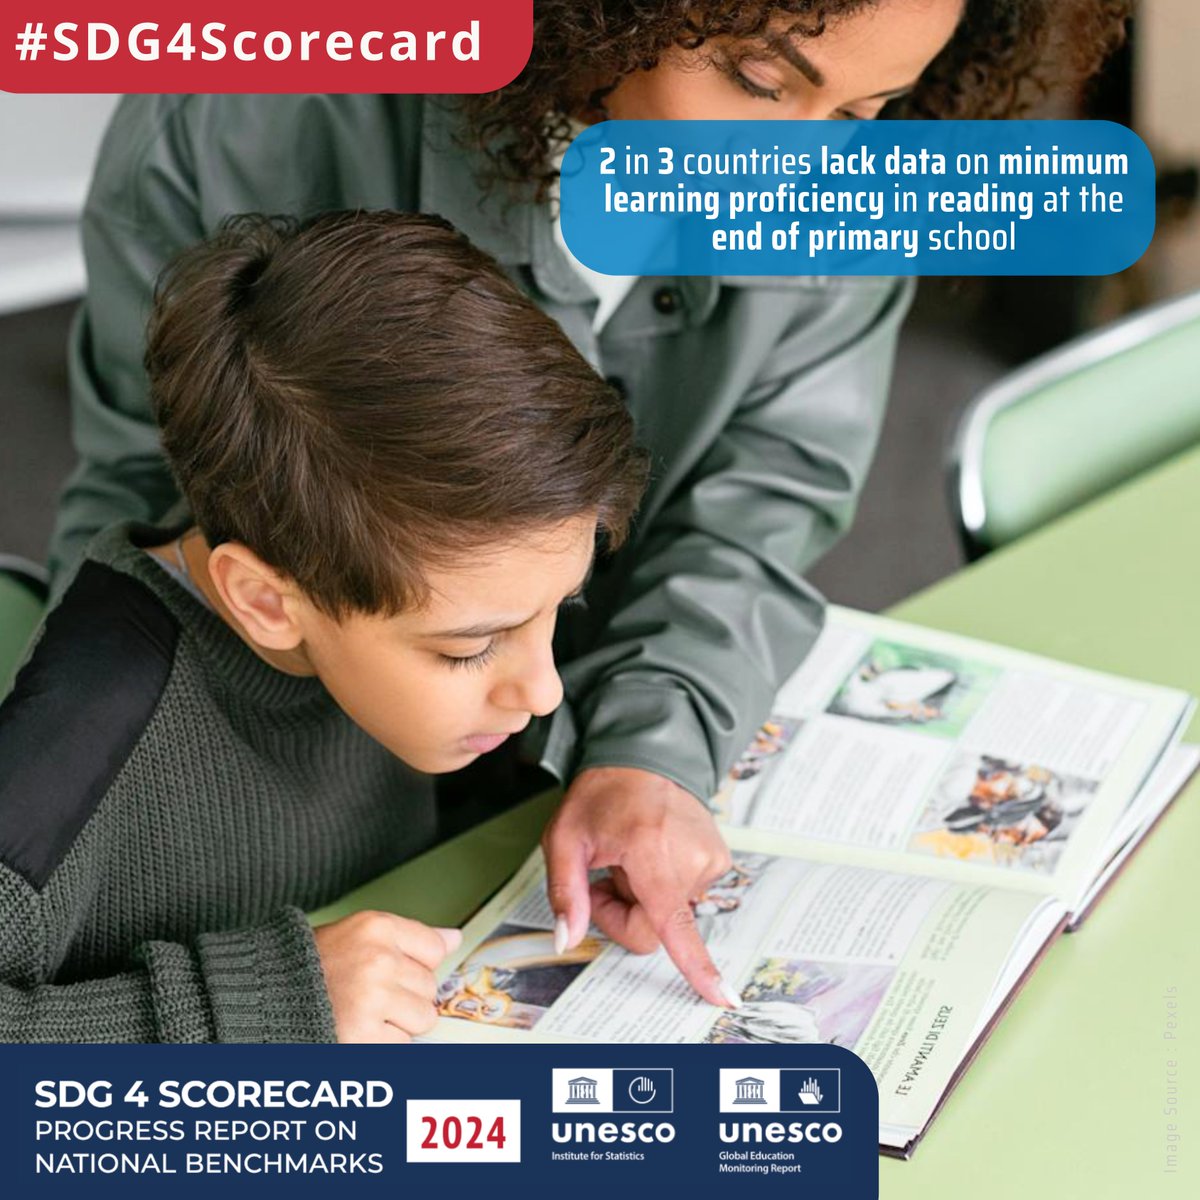 📊 Did you know? 47% of countries lack #data on minimum proficiency in #reading at the end of primary #education, and 20% lack data to analyze trends. Learn more in the #SDG4Scorecard ➡️ unesdoc.unesco.org/ark:/48223/pf0… See the #Datagaps ➡️ tcg.uis.unesco.org/data-gaps-map/